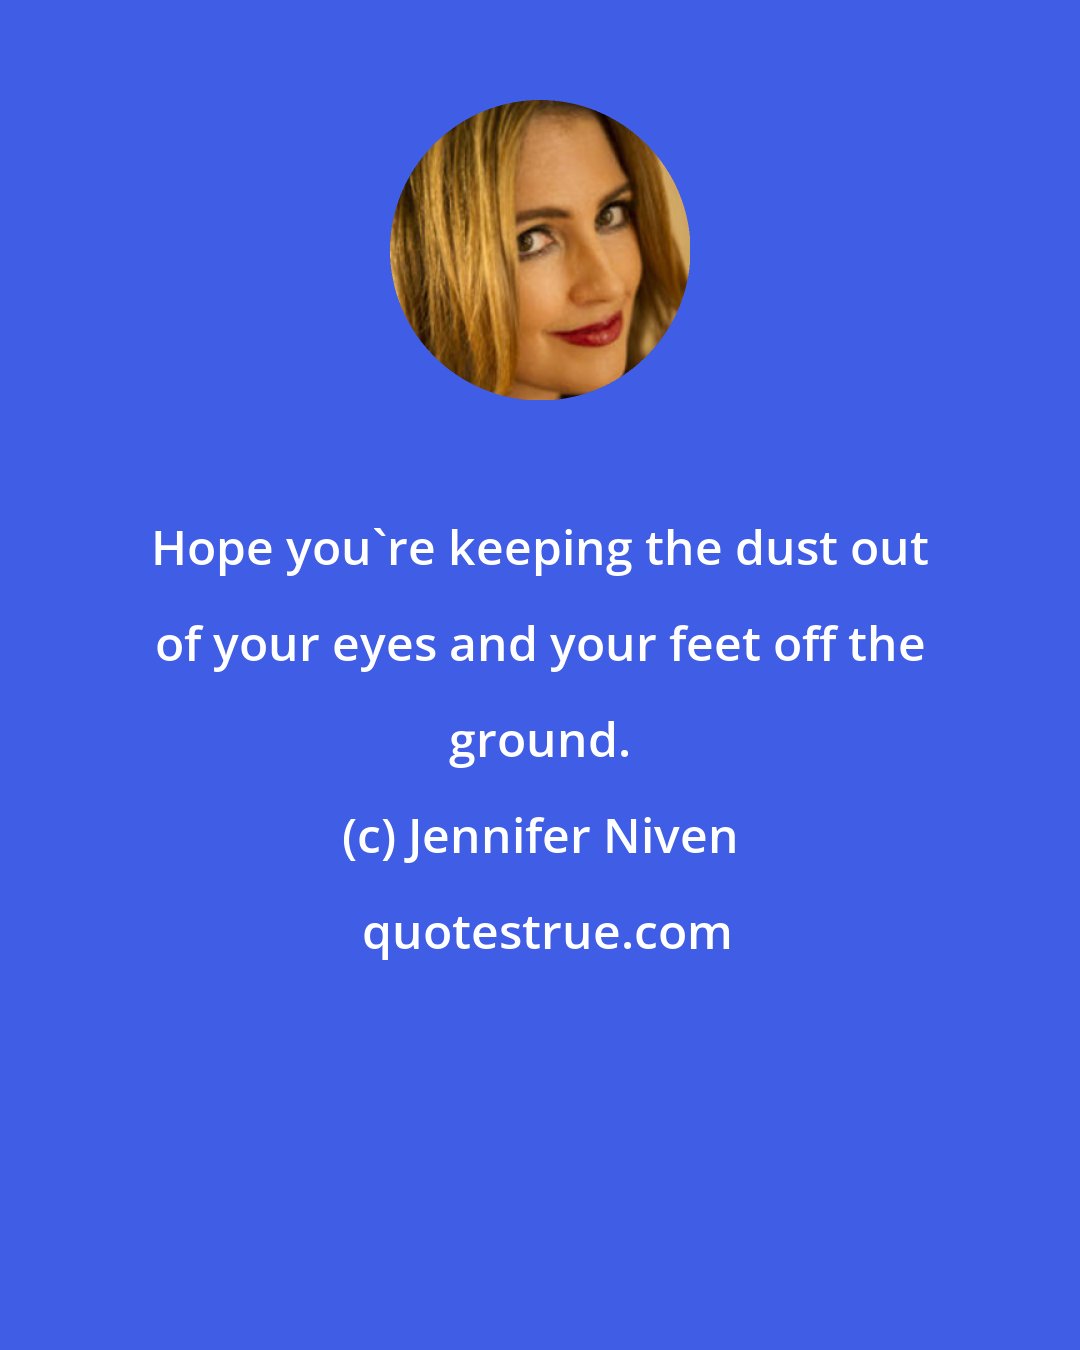 Jennifer Niven: Hope you're keeping the dust out of your eyes and your feet off the ground.